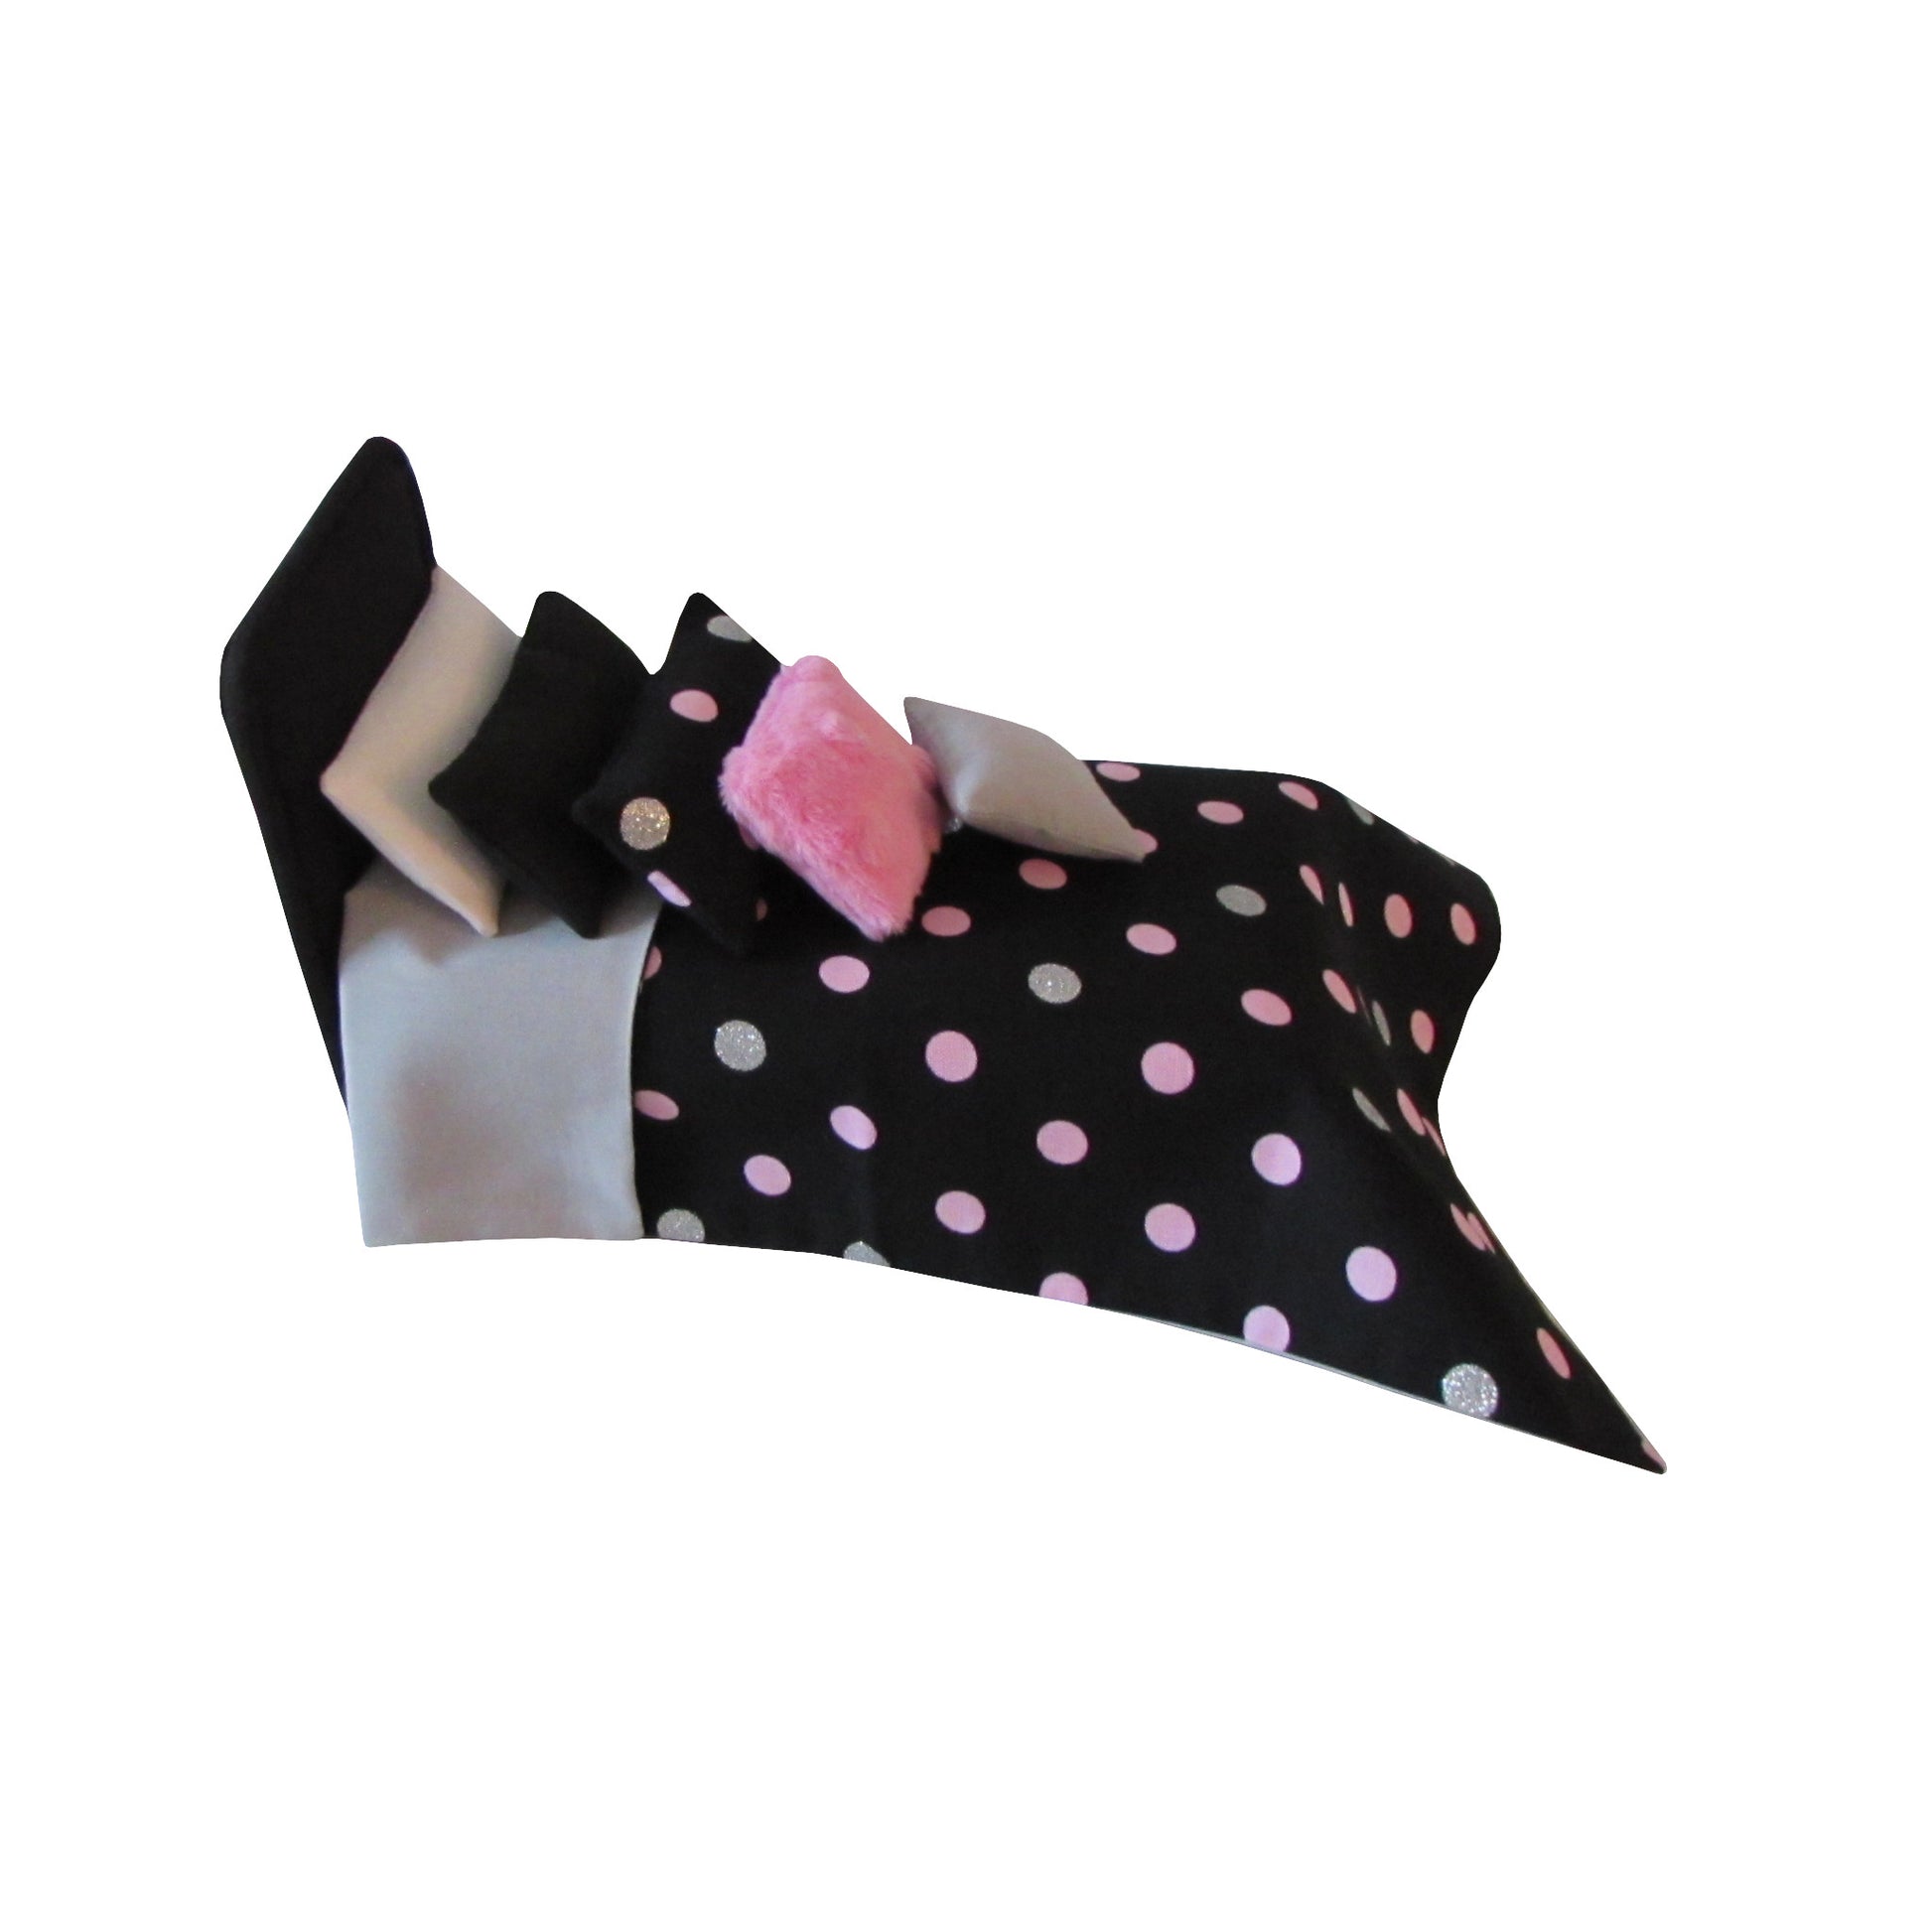 Black Doll Bed and Dots Doll Bedding for 6.5-inch dolls